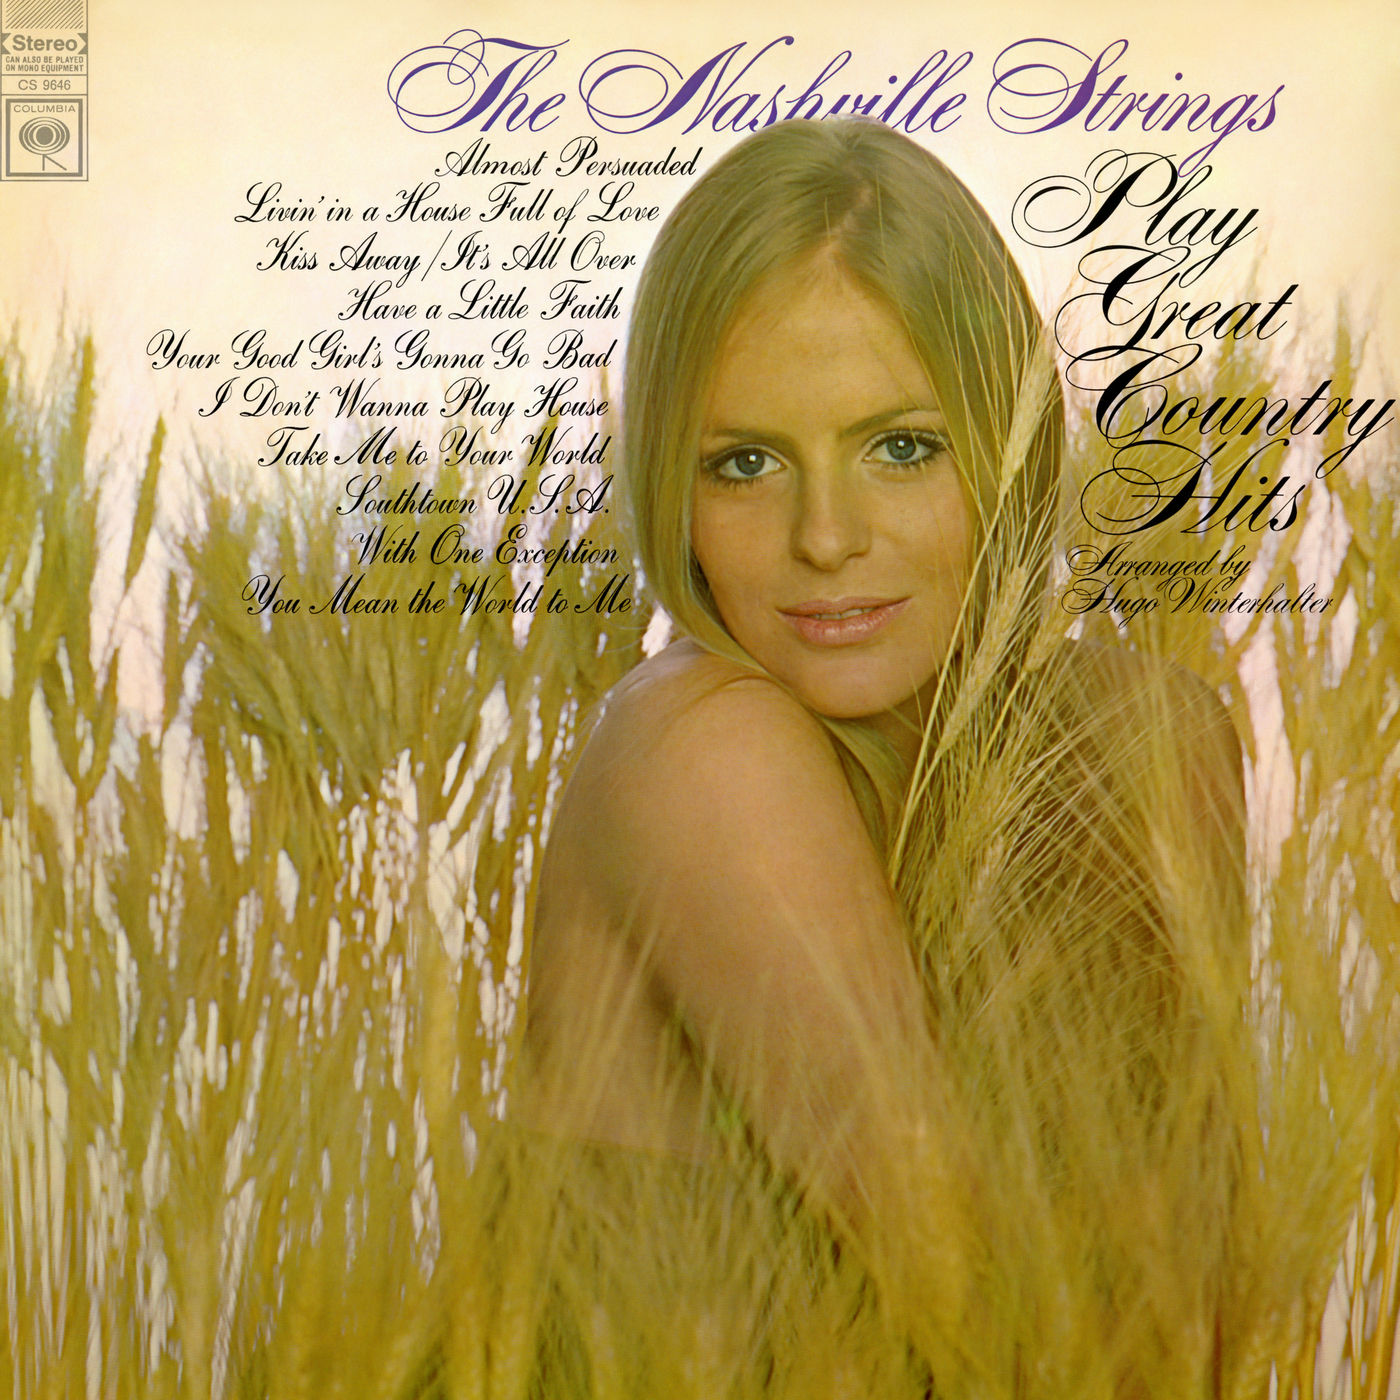 The Nashville Strings – The Nashville Strings Play Great Country Hits